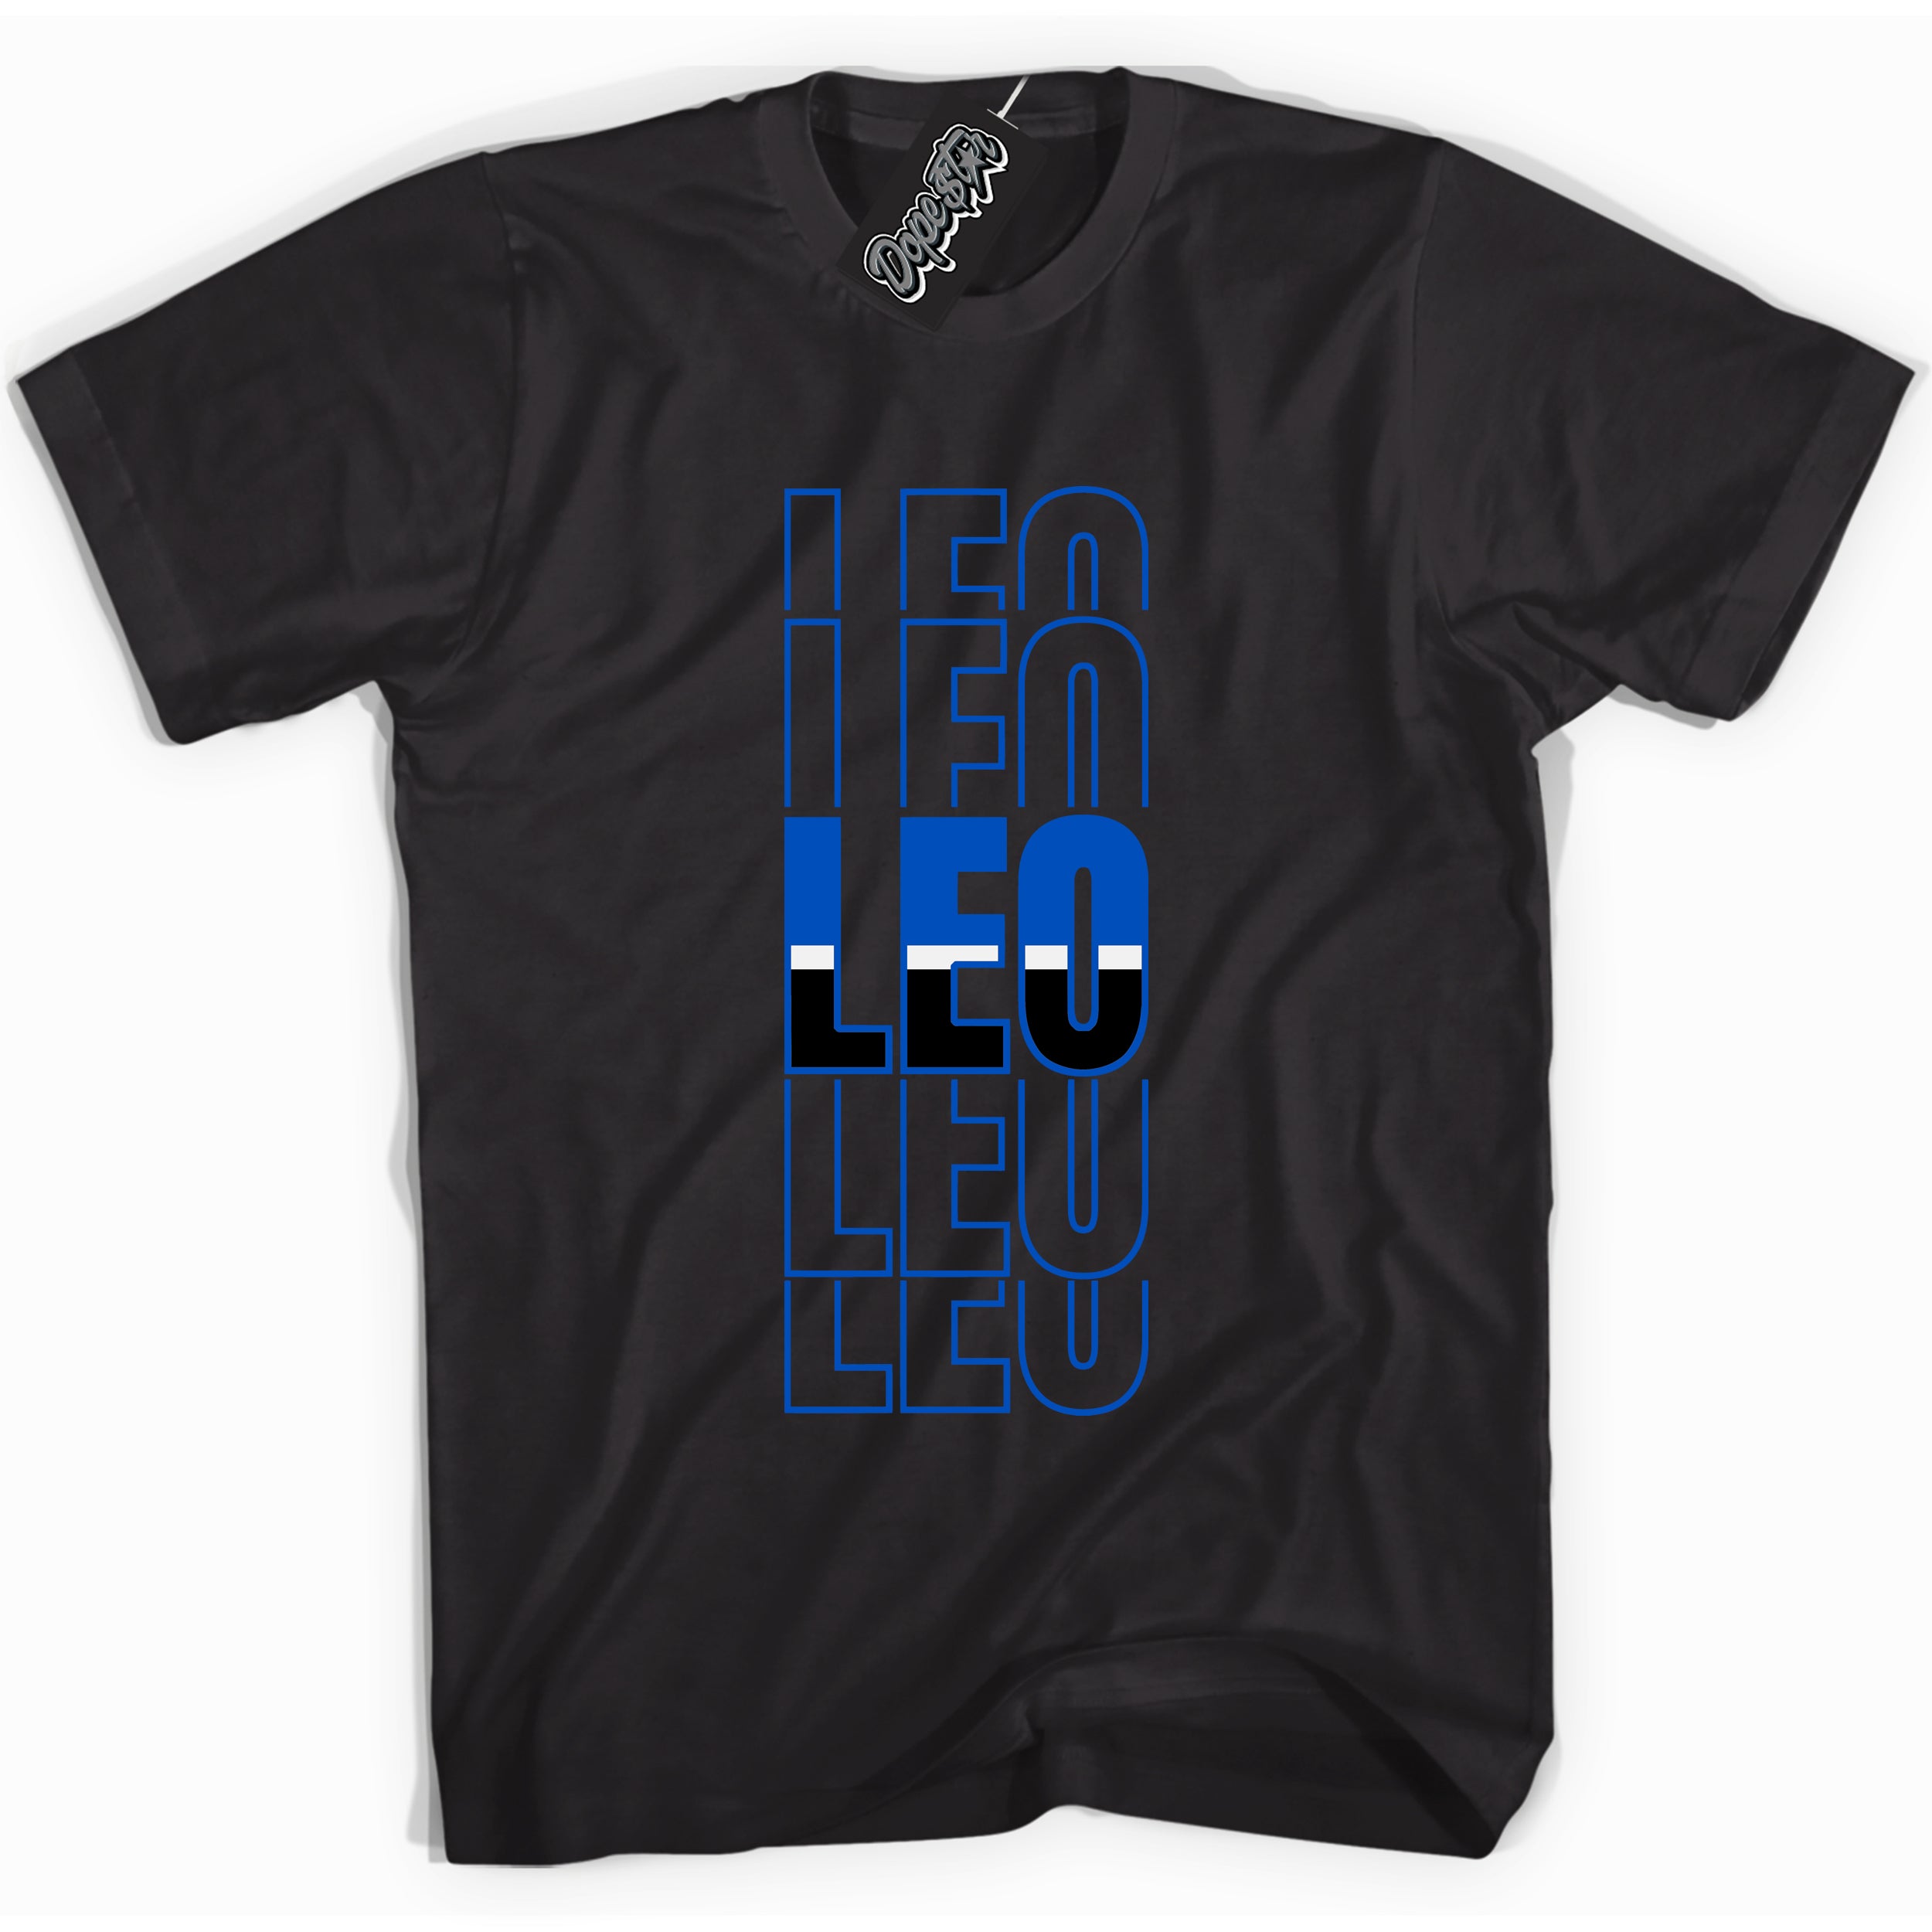 Cool Black graphic tee with "Leo" design, that perfectly matches Royal Reimagined 1s sneakers 